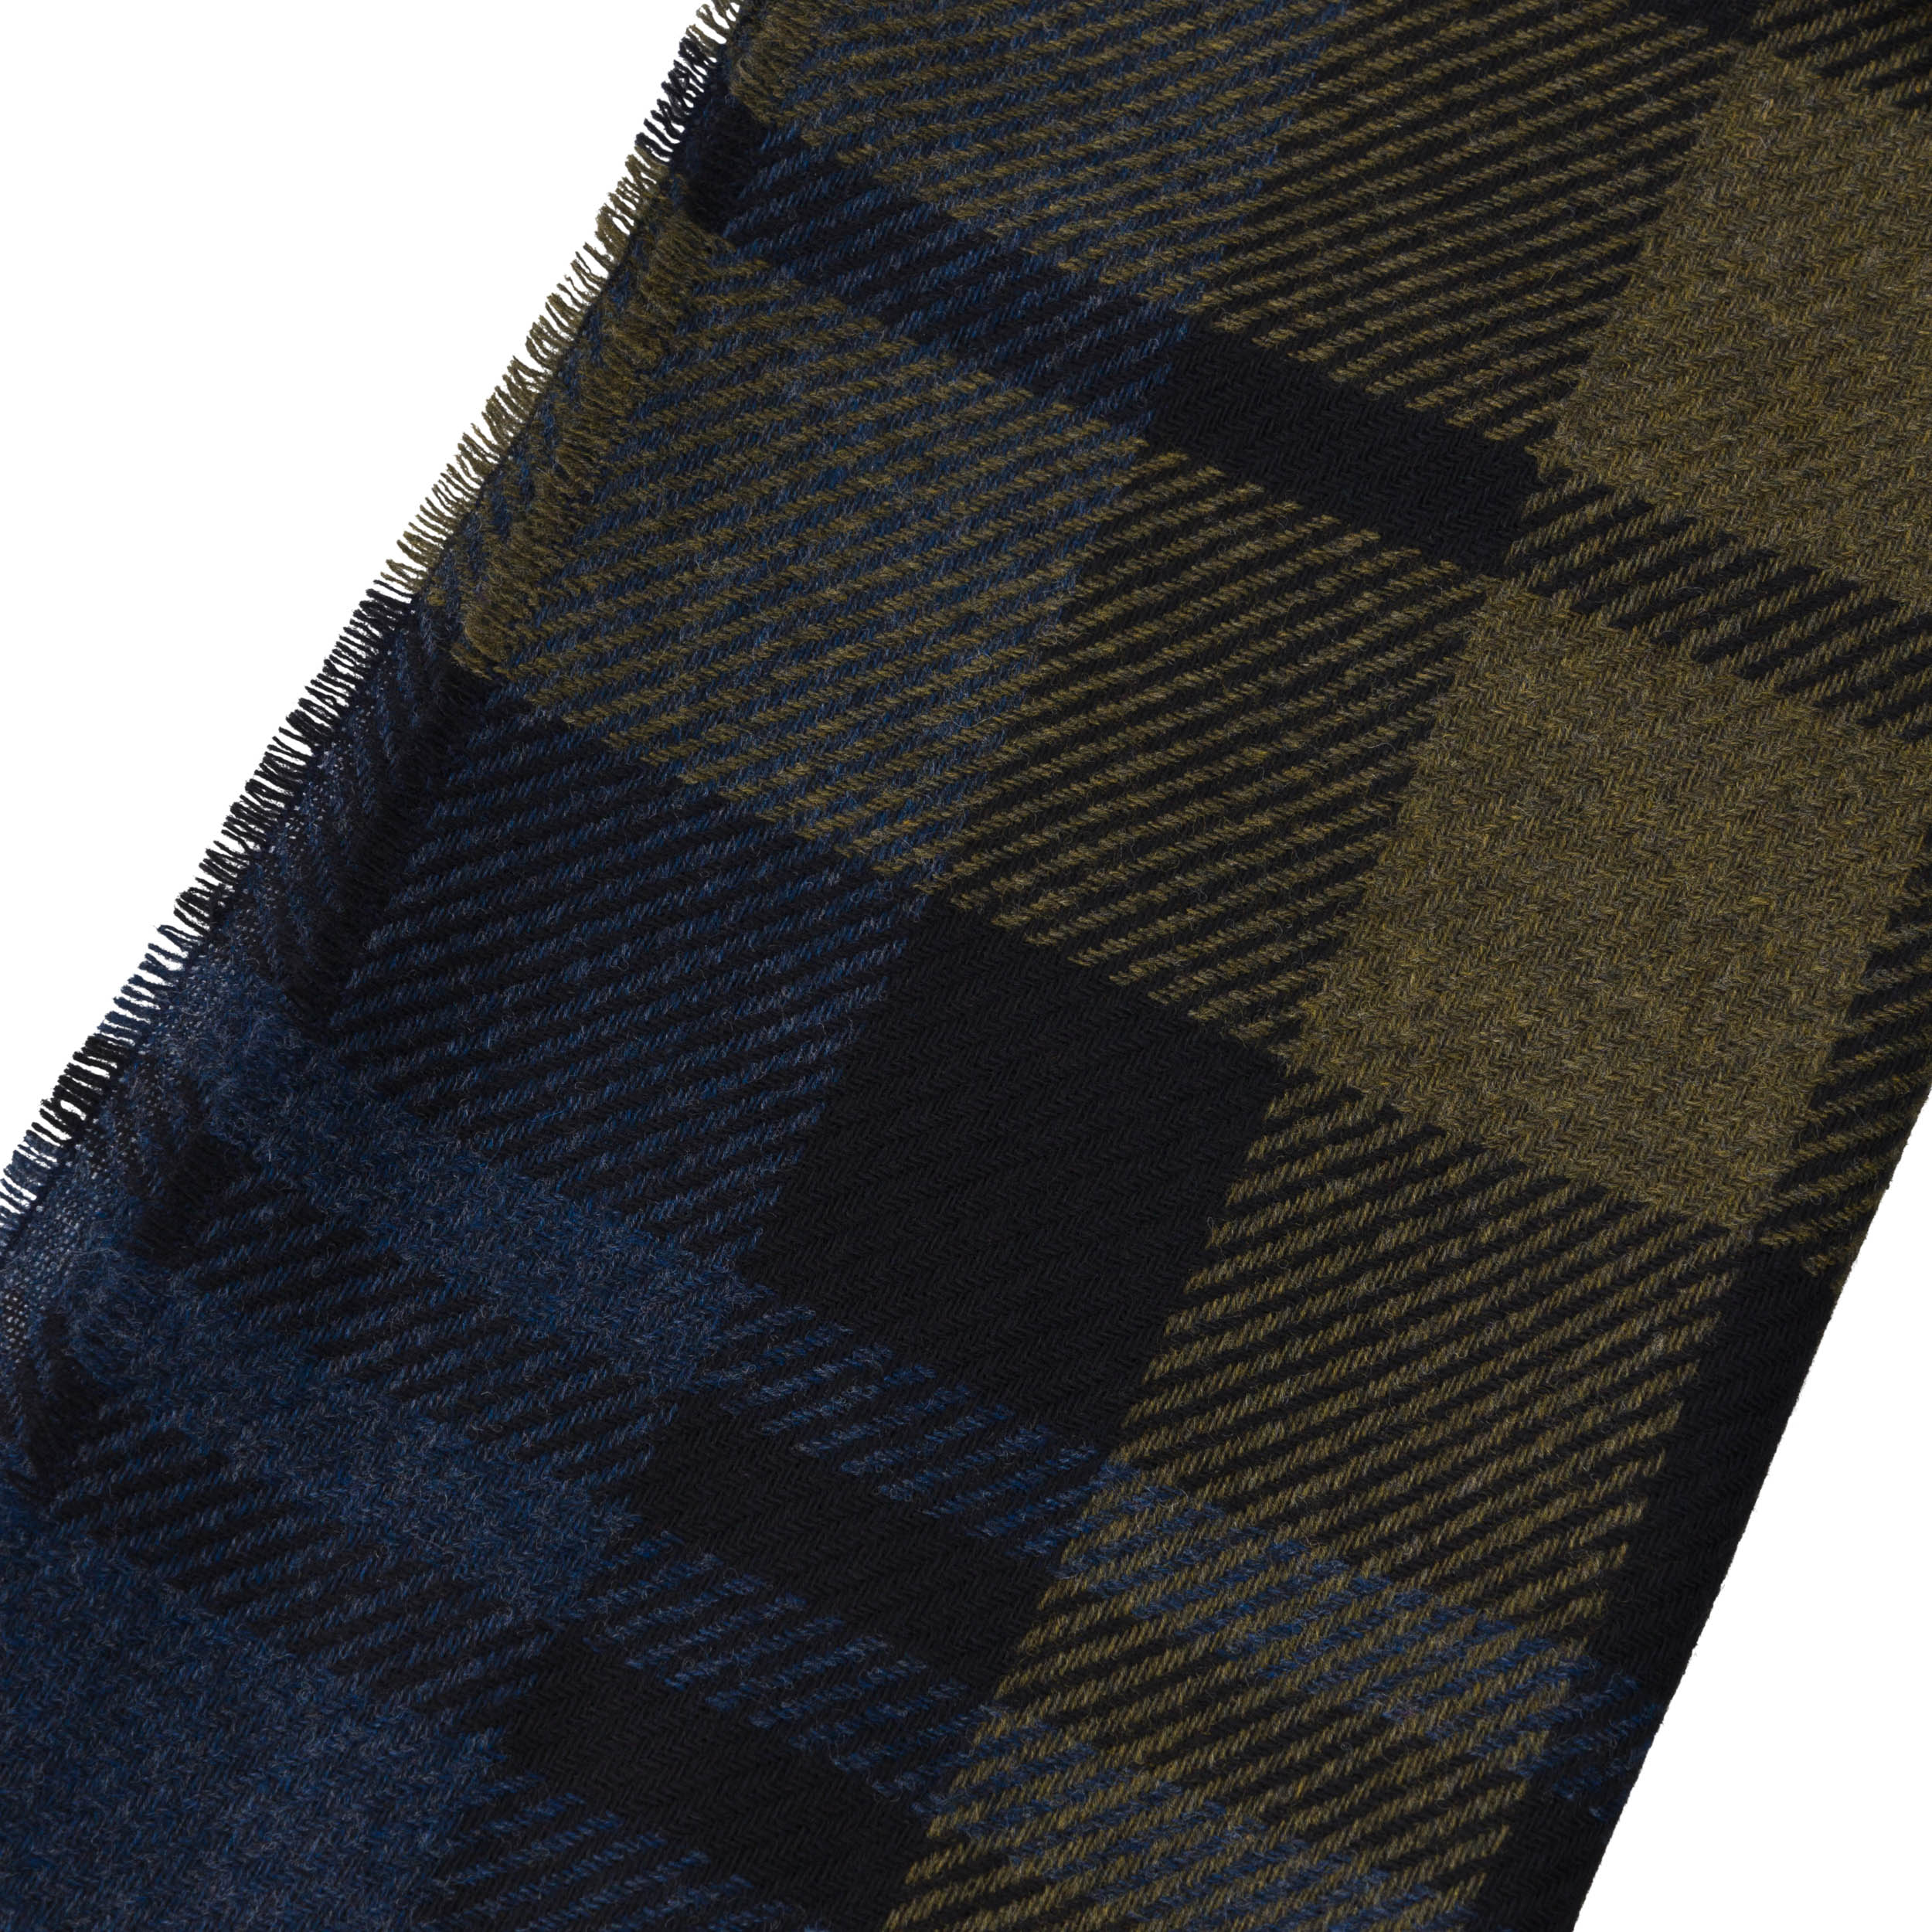 Carrier Company Luxury Cashmere & Lambswool Scarf in Black Watch Olive